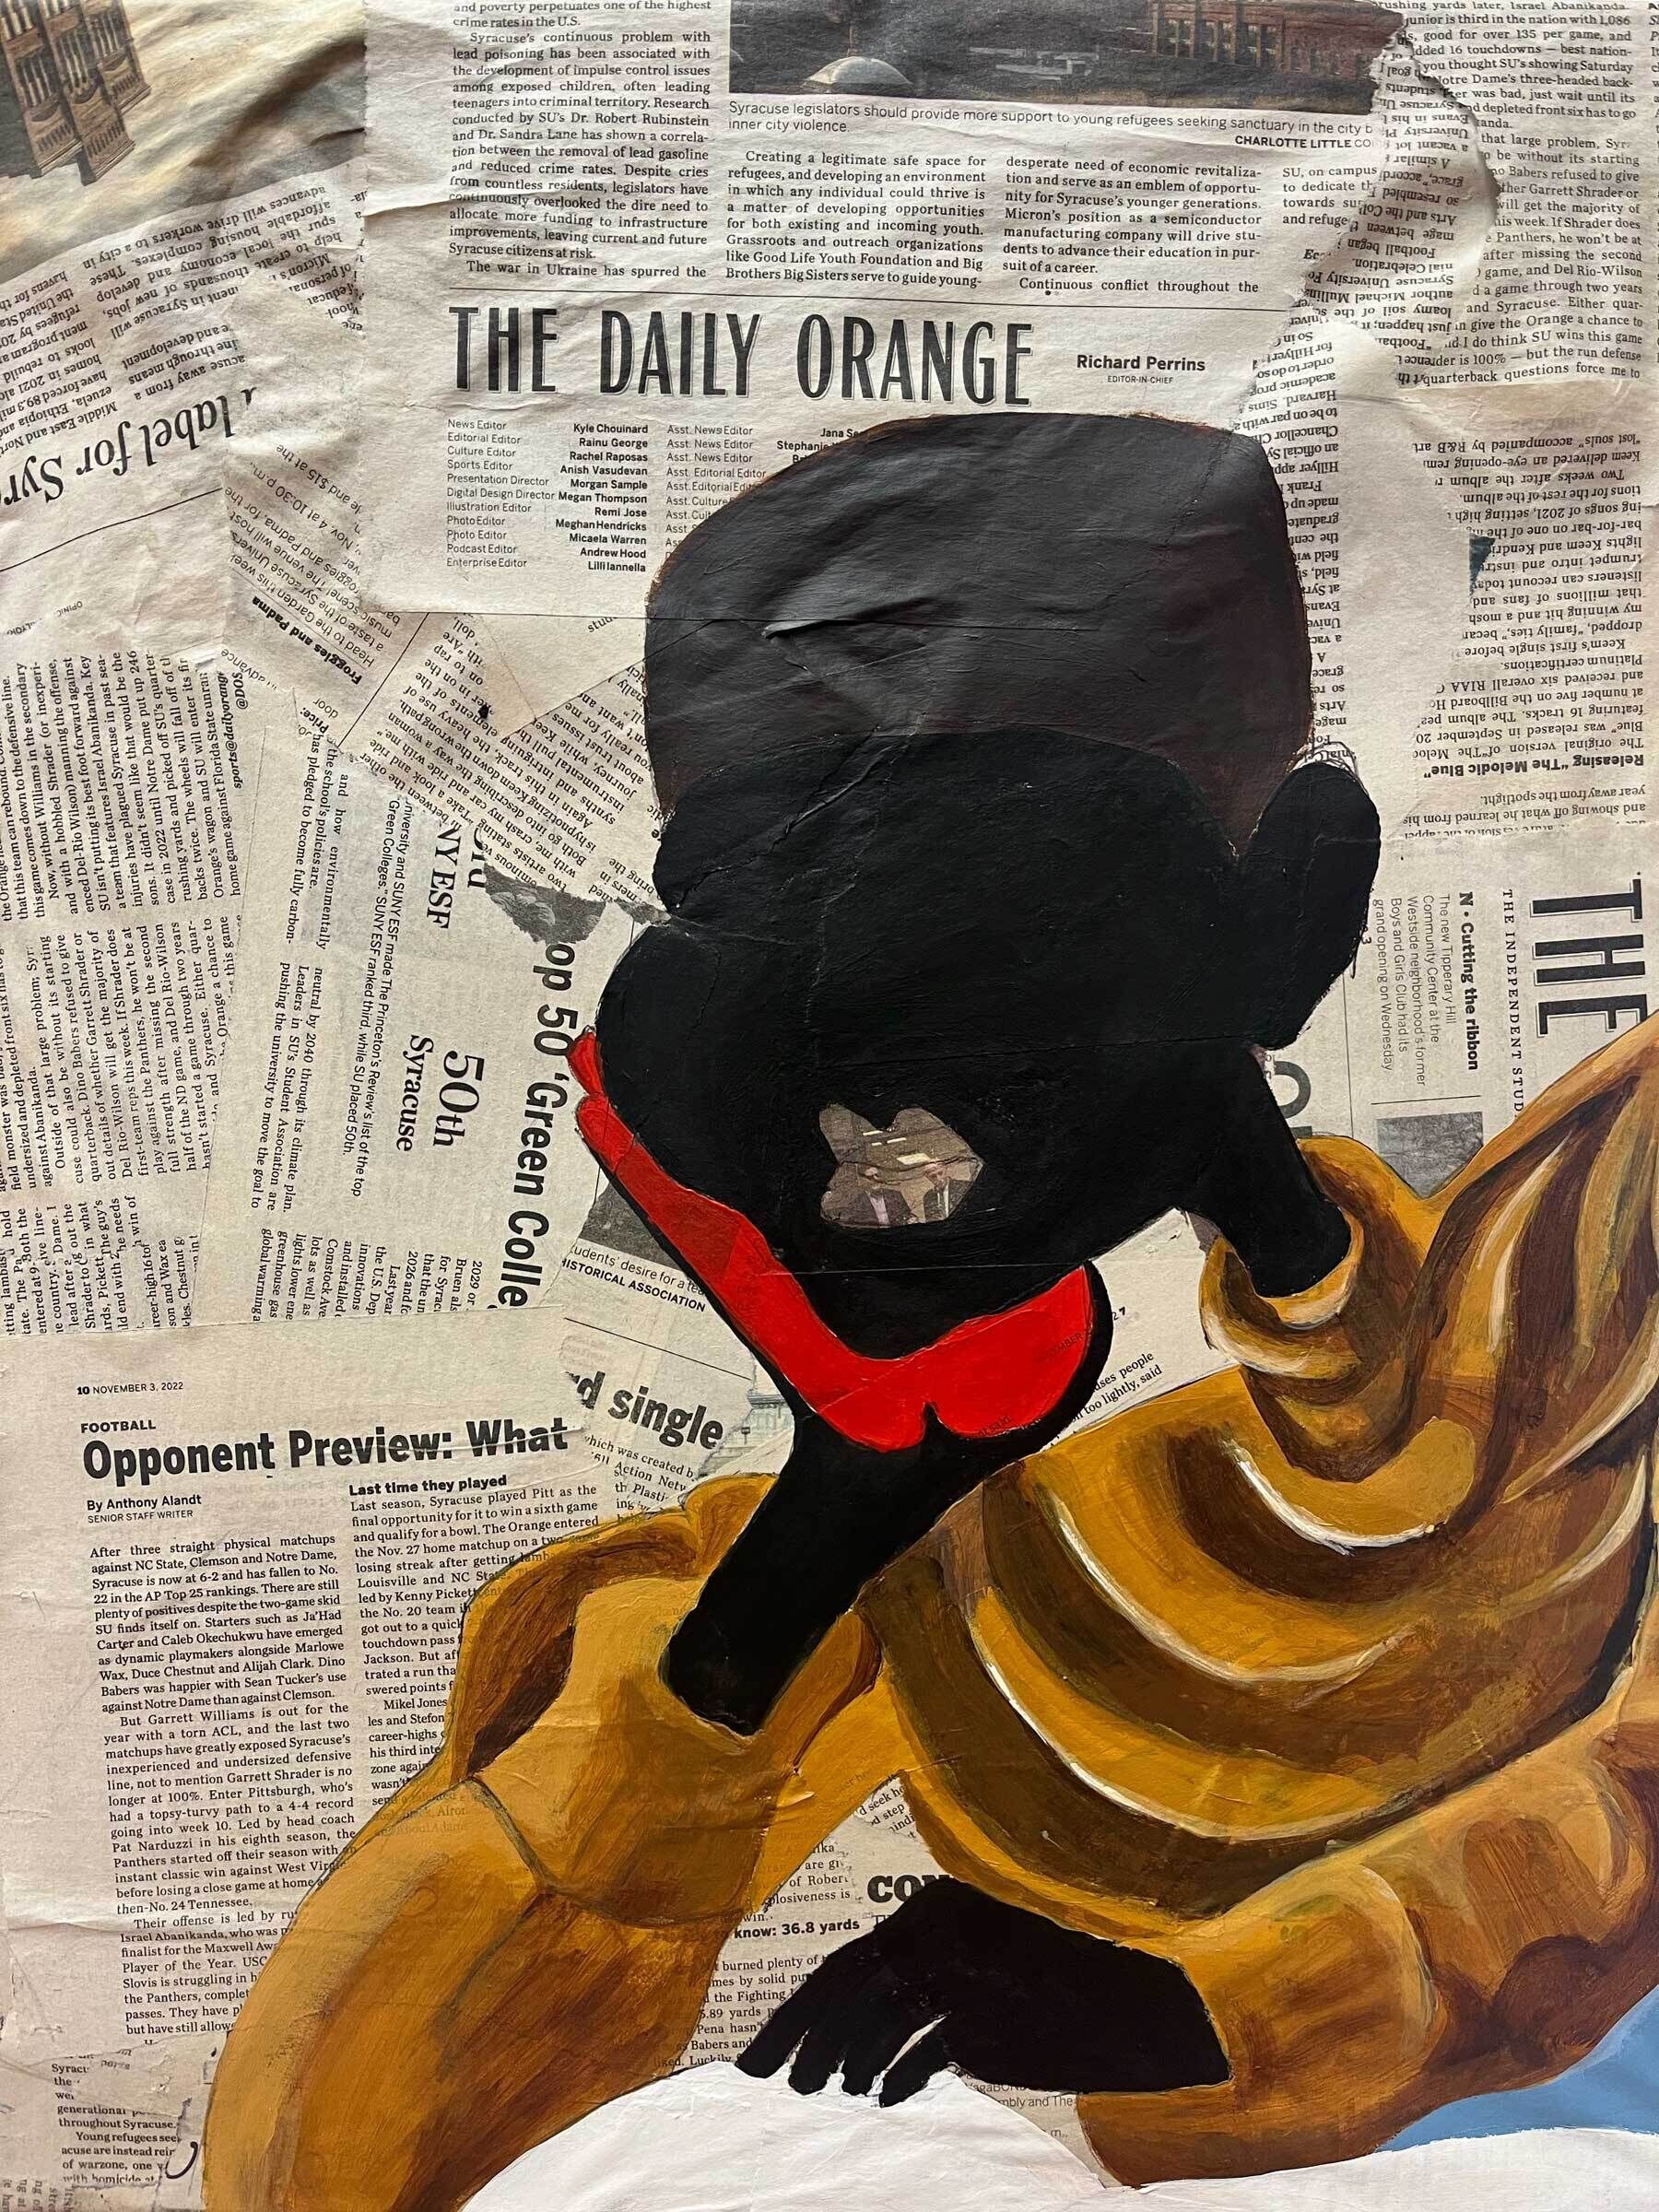 A painting of a person in a yellow jacket and red scarf, holding a camera to their face. The background is a collage of newspaper clippings.